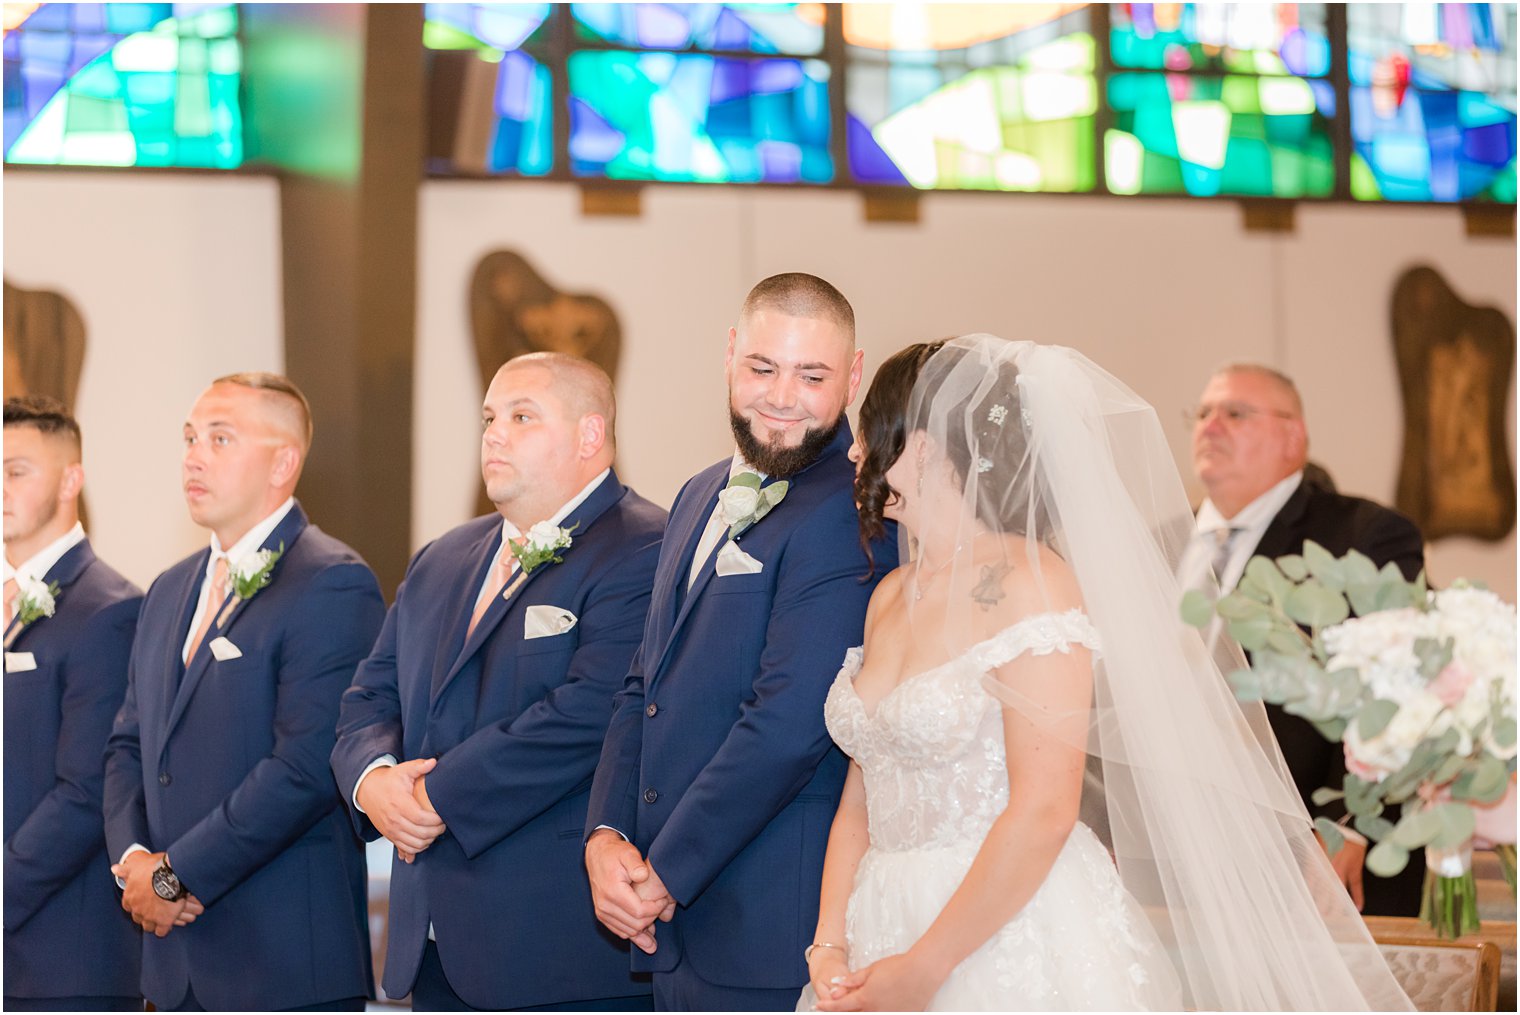 bride and groom smile together during traditional wedding ceremony at Saint Matthew the Apostle church